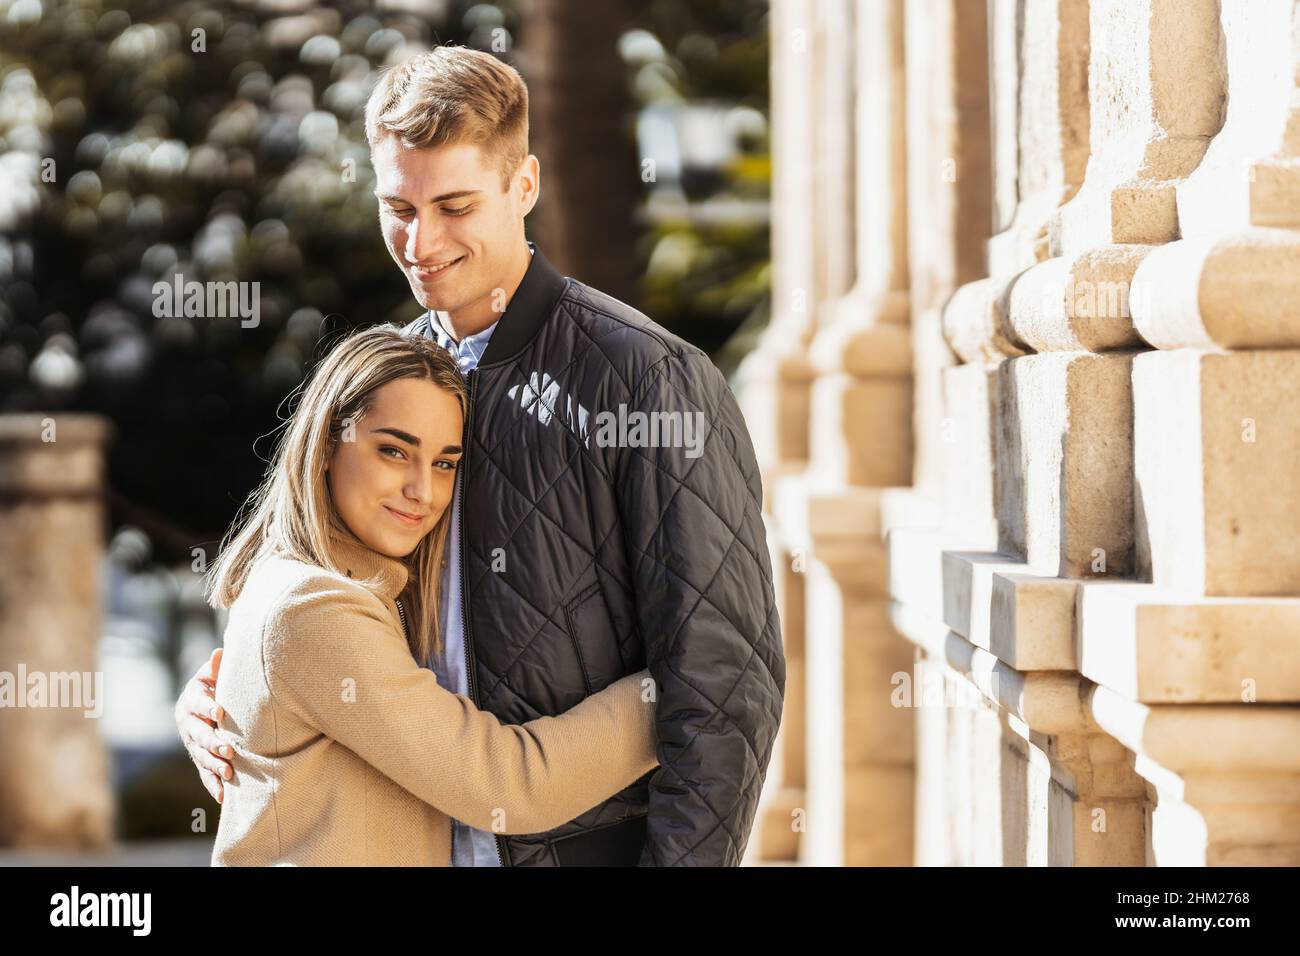 a young woman embraces her boyfriend in an affectionate way Stock Photo